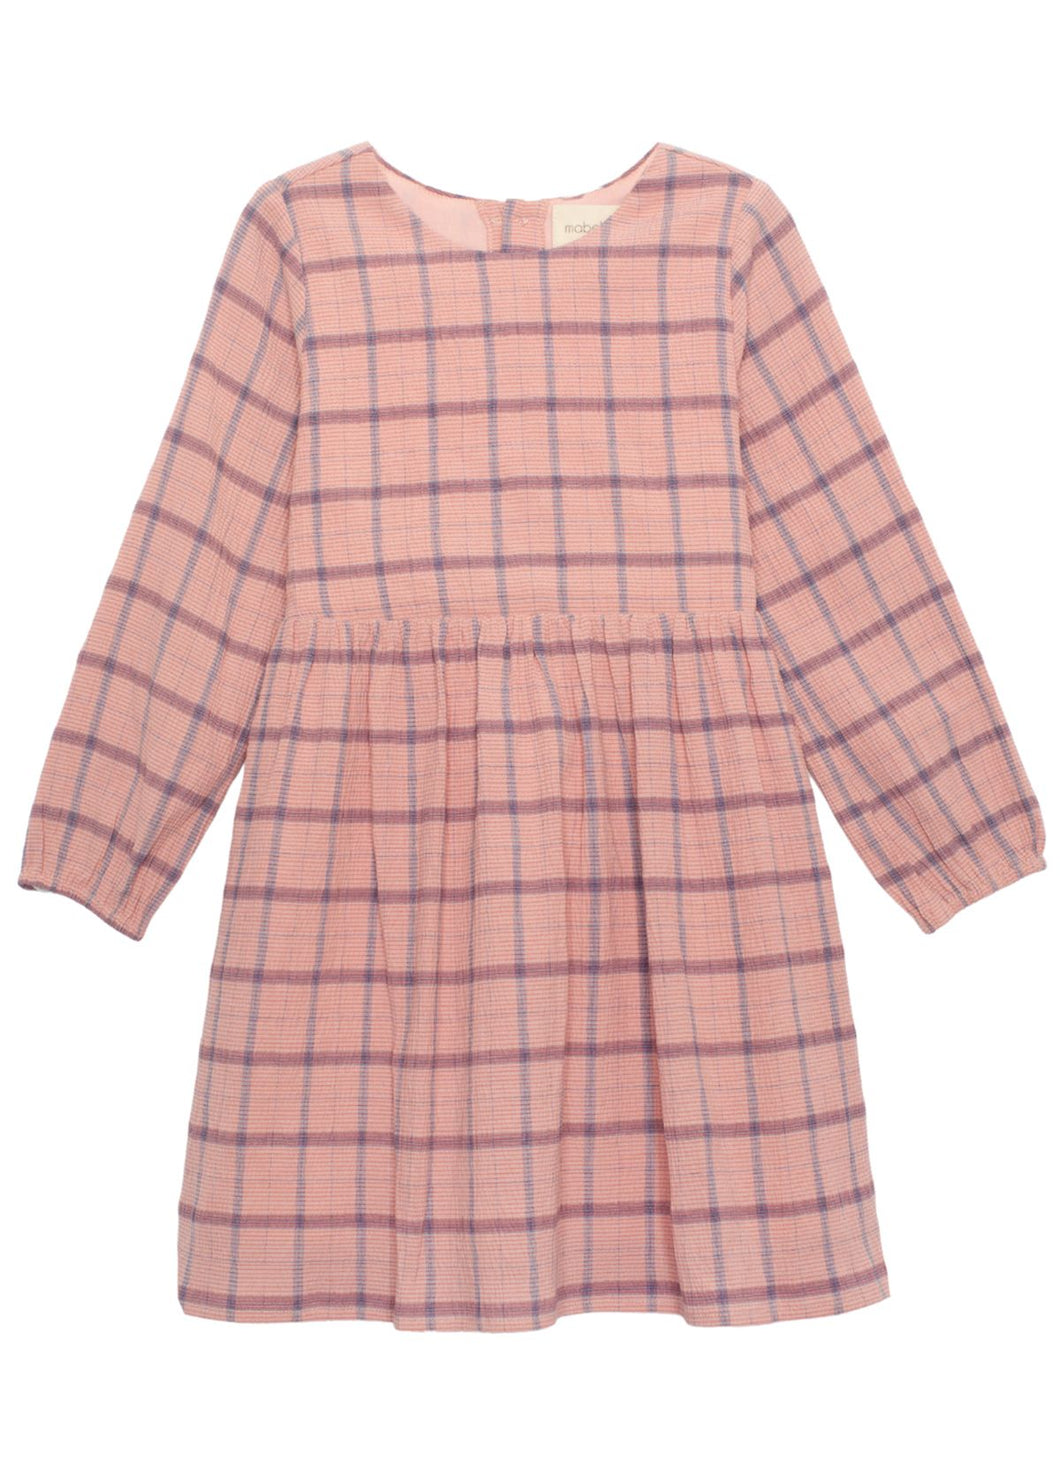 mabel + honey: Dress - Into the Field Woven Plaid (Pink)